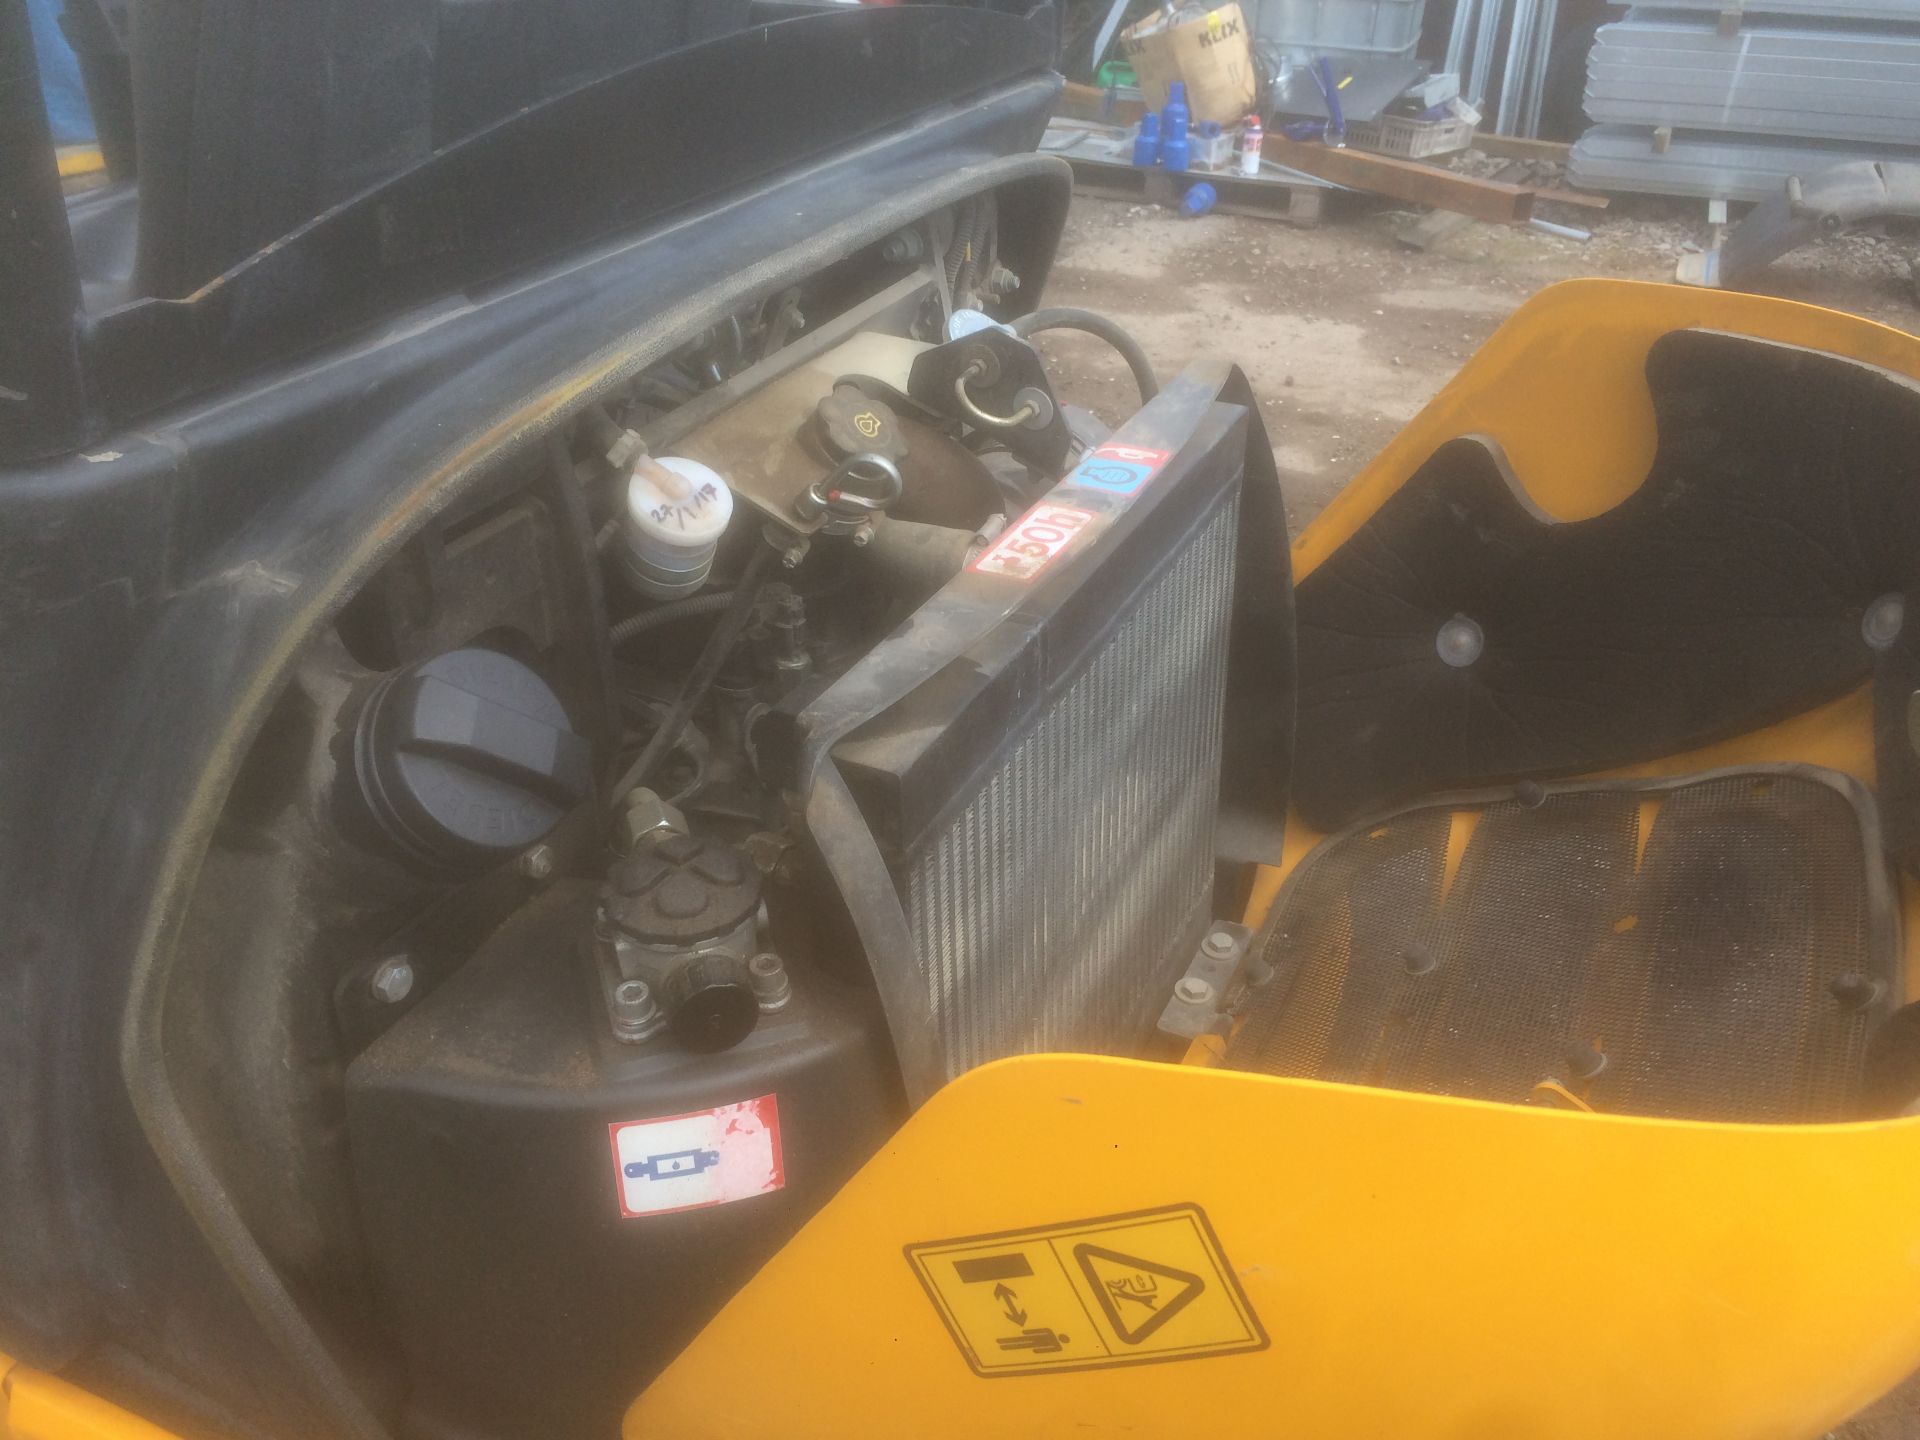 4 x 2014 8014 JCB Mini Diggers *RESERVE REDUCED* - Image 6 of 7